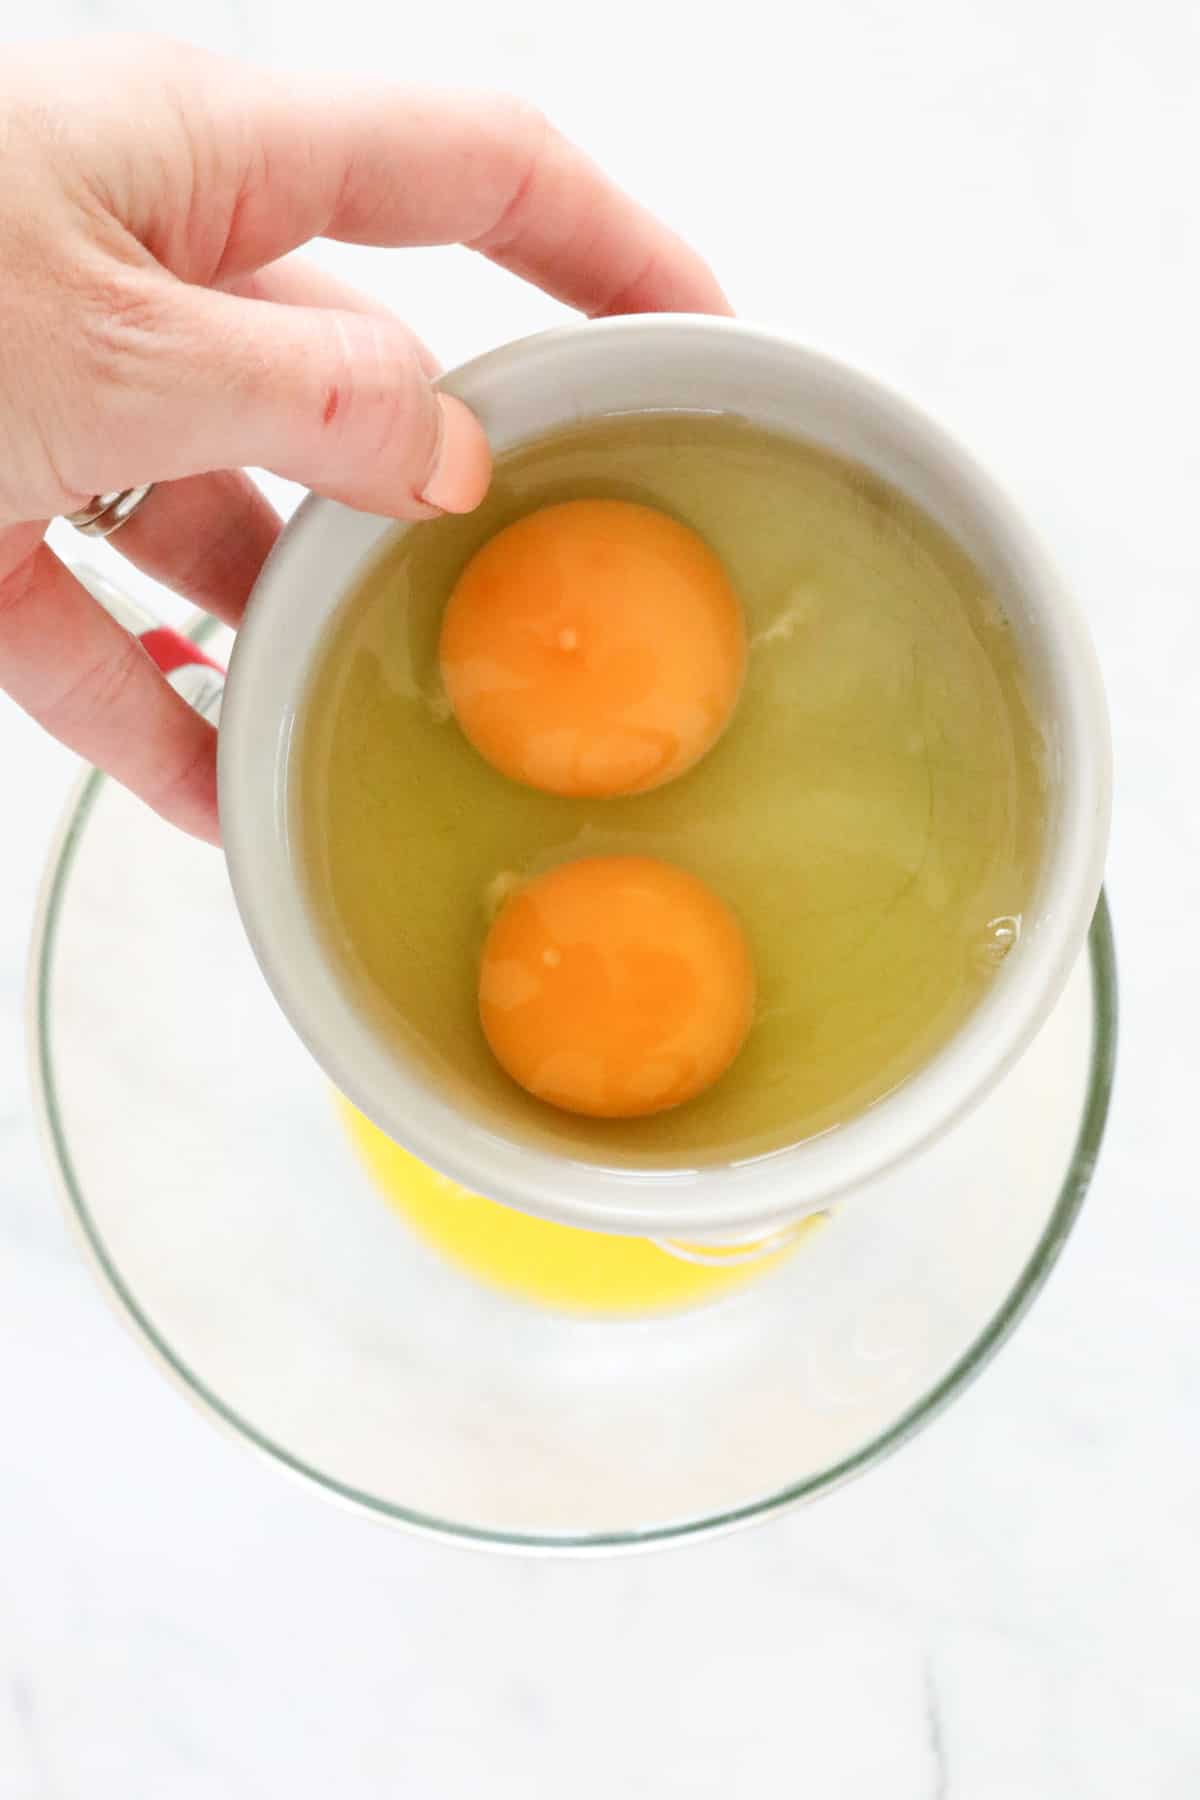 A hand holding a bowl with two eggs in it. 